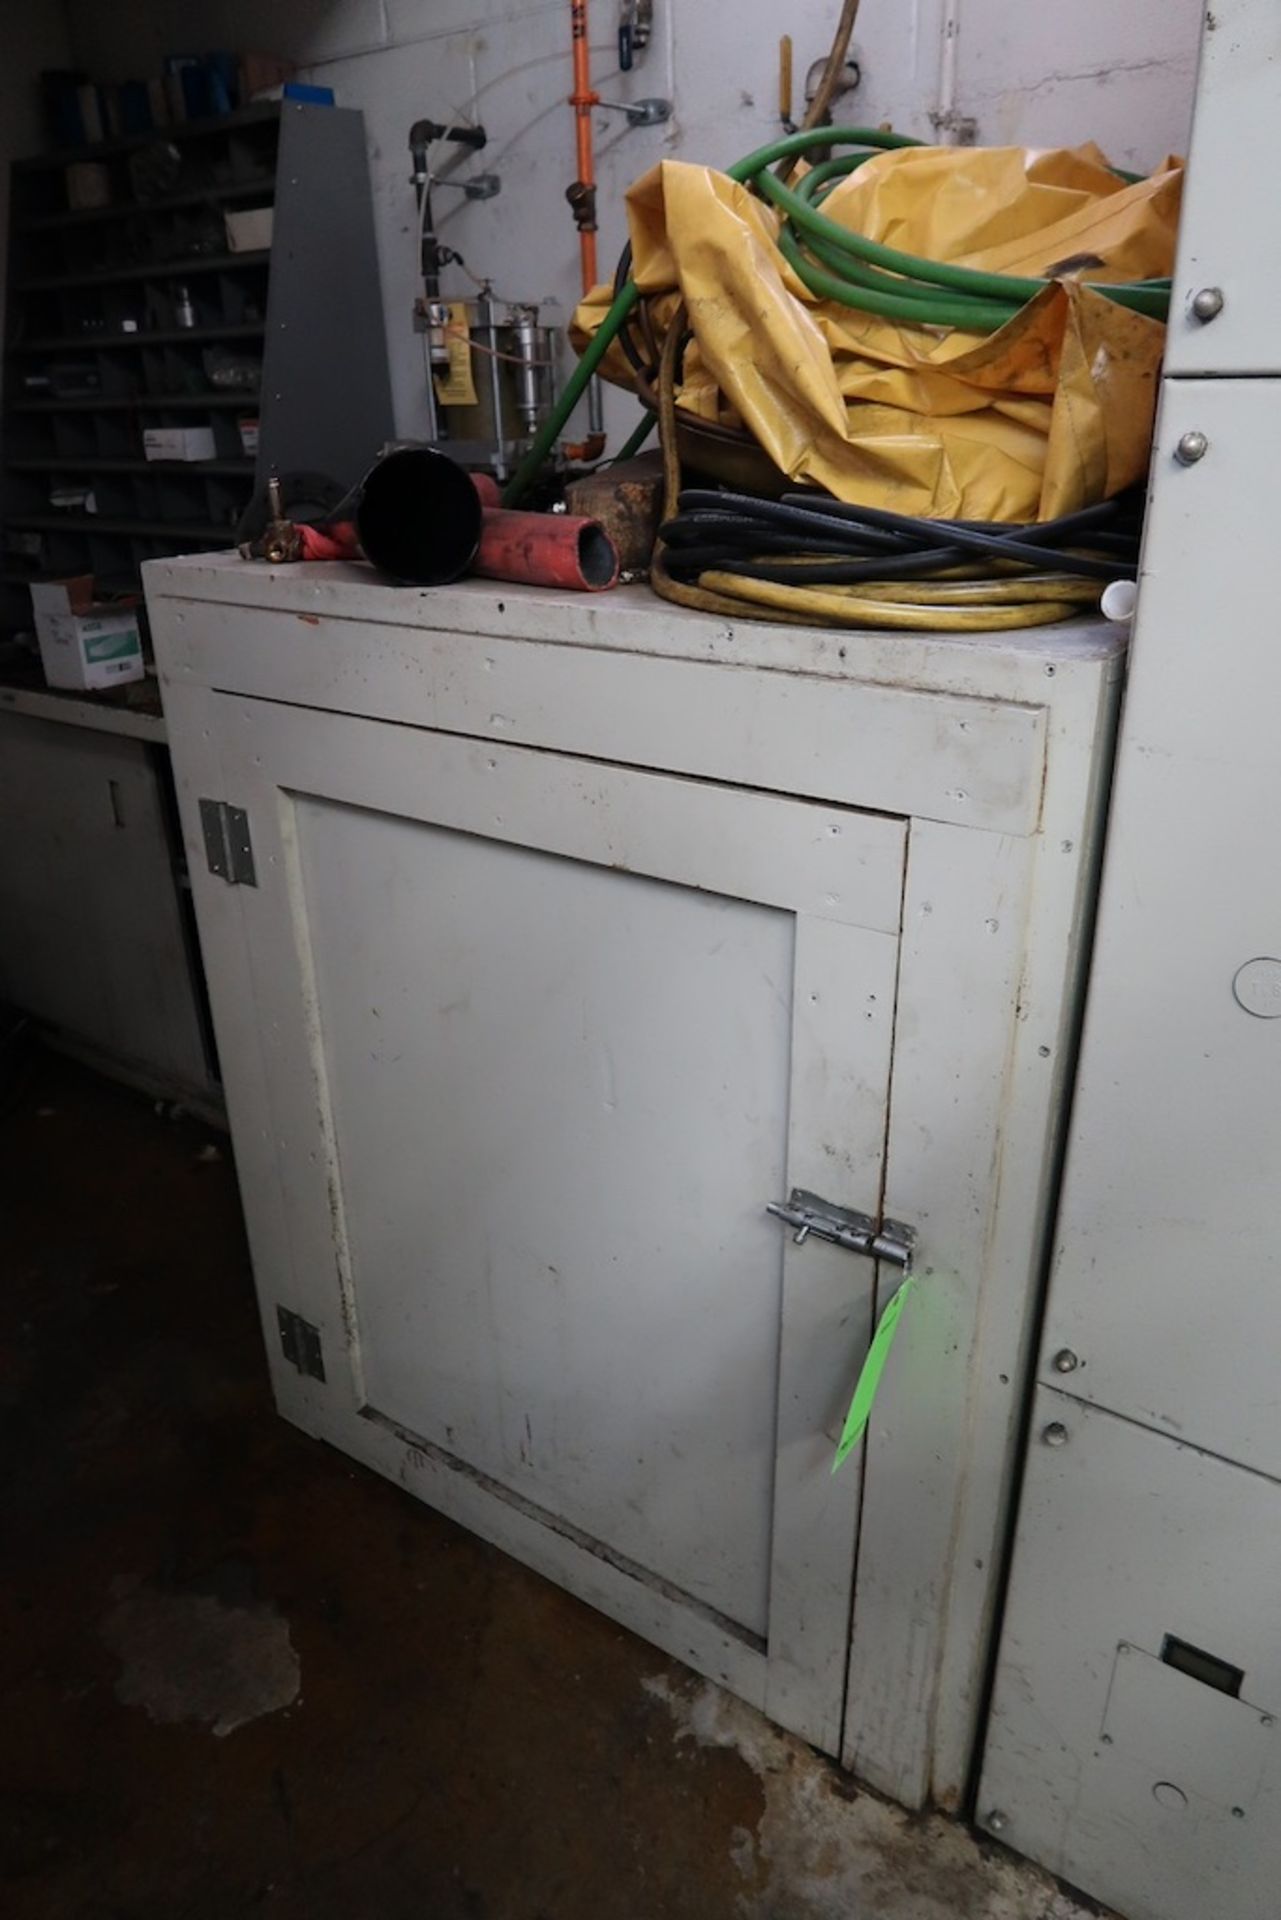 Remaining Contents of Compressor Room, to Include Desks, Cabinets, Etc. - Image 18 of 21